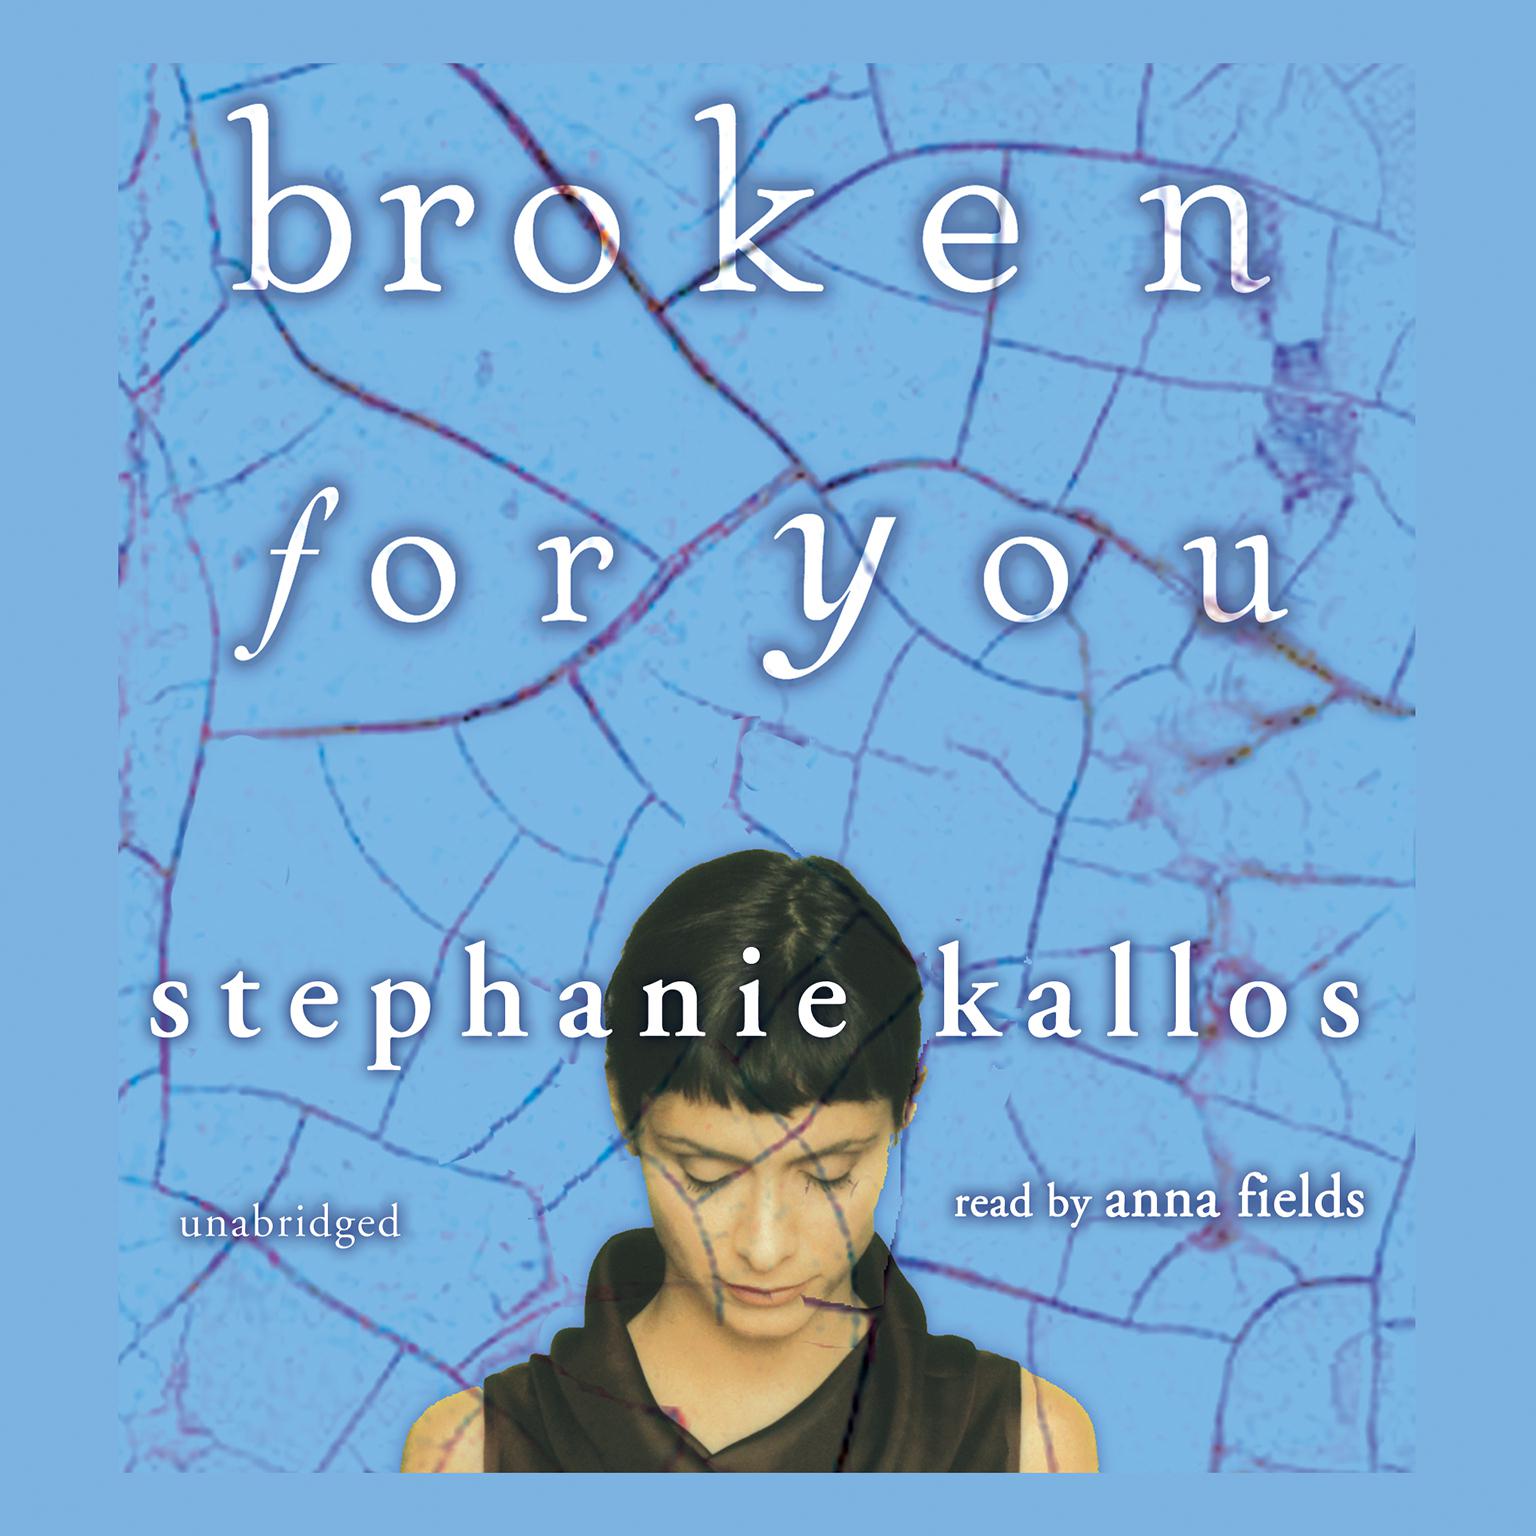 broken for you book review